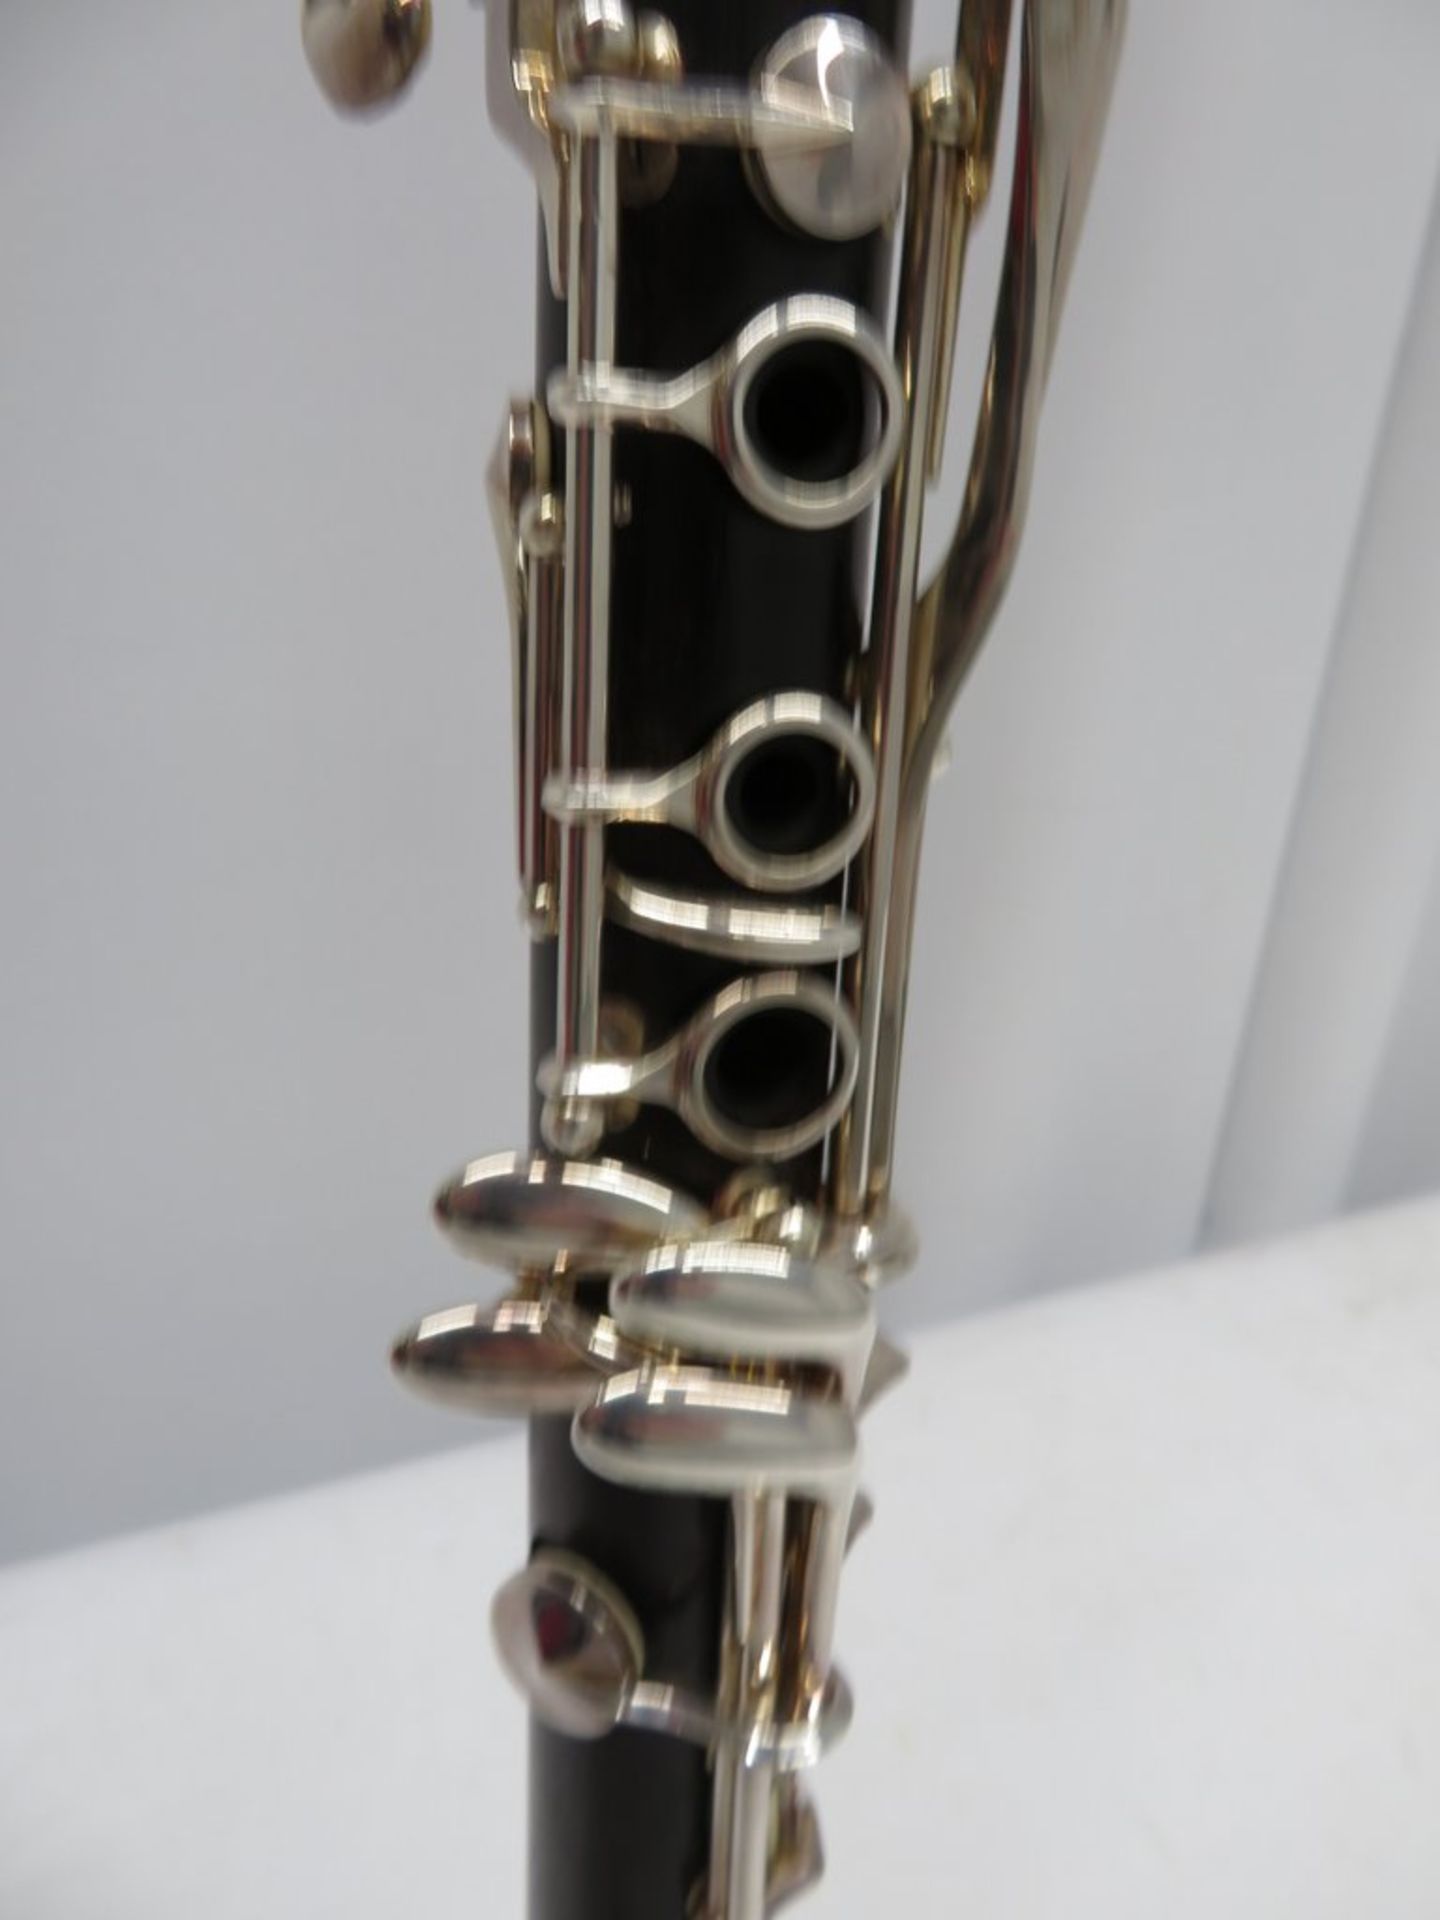 Buffet Crampon R13 Clarinet With Case. Serial Number: 386372. Full Length 63cm. Please Not - Image 11 of 18